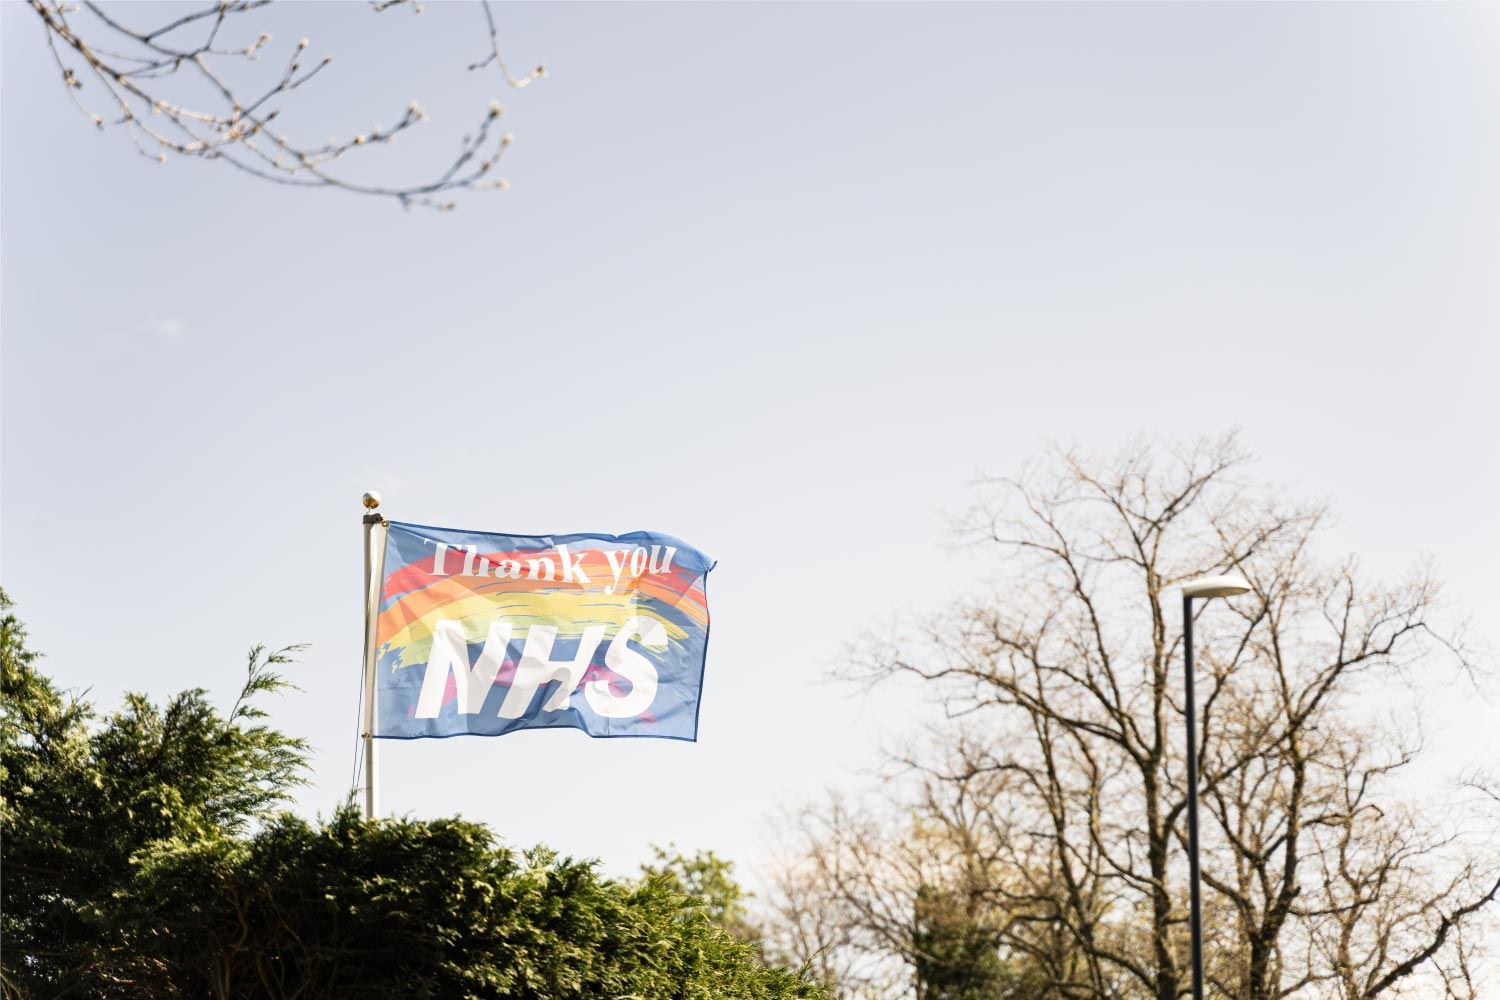 NHS thank you flag above trees with sky in the background.